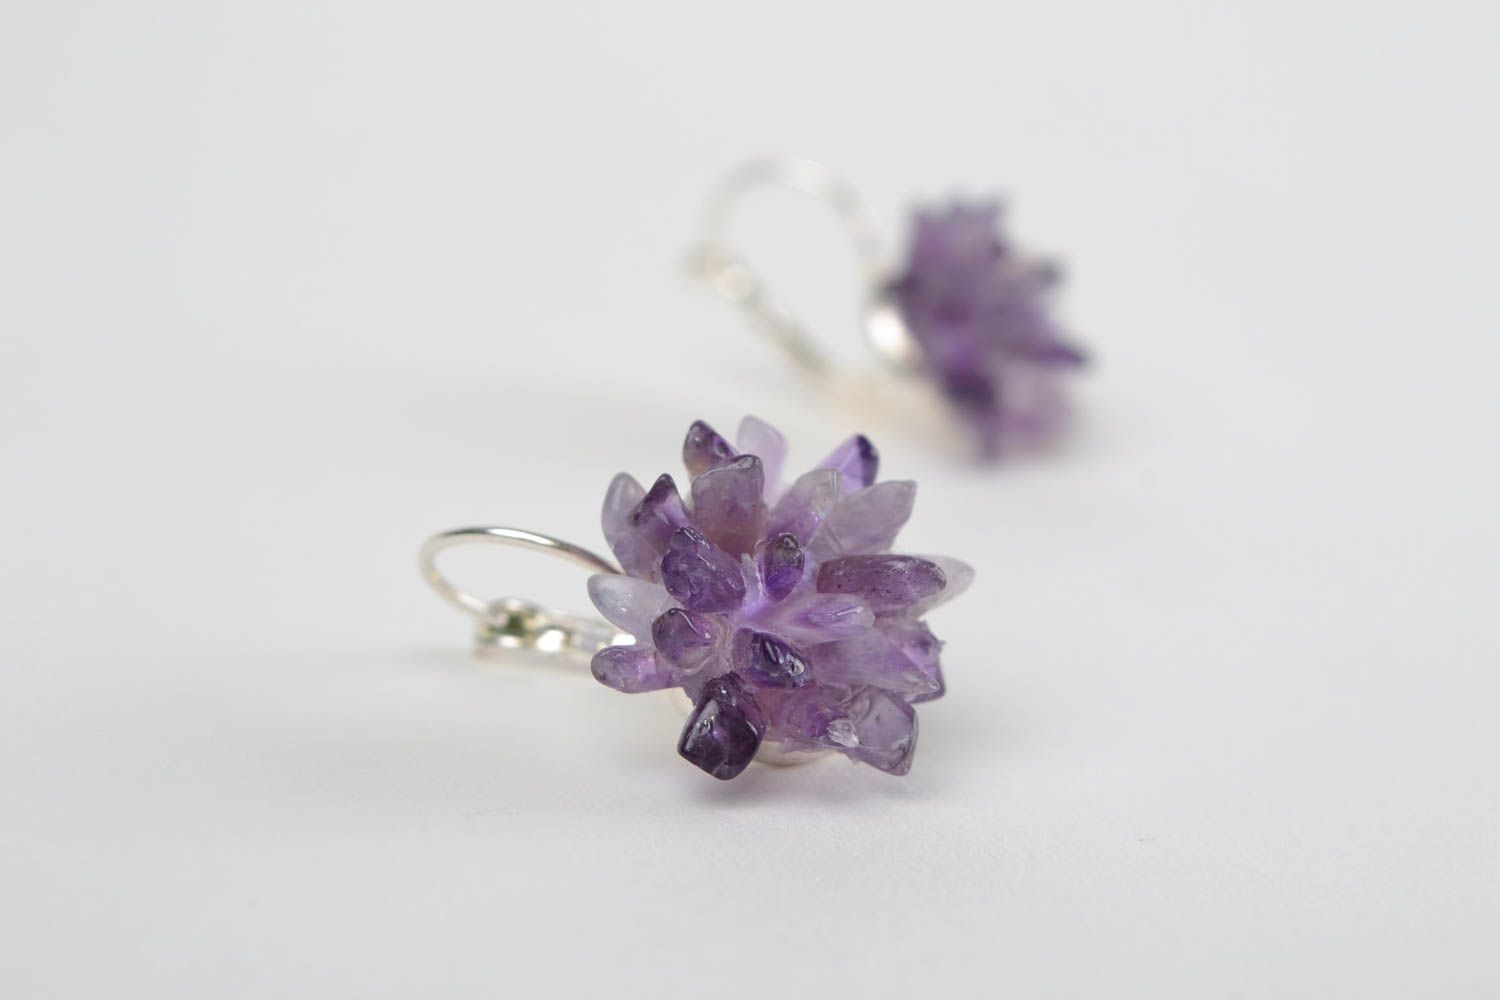 Lilac beautiful handmade earrings with amethyst stones in the shape of flowers photo 4